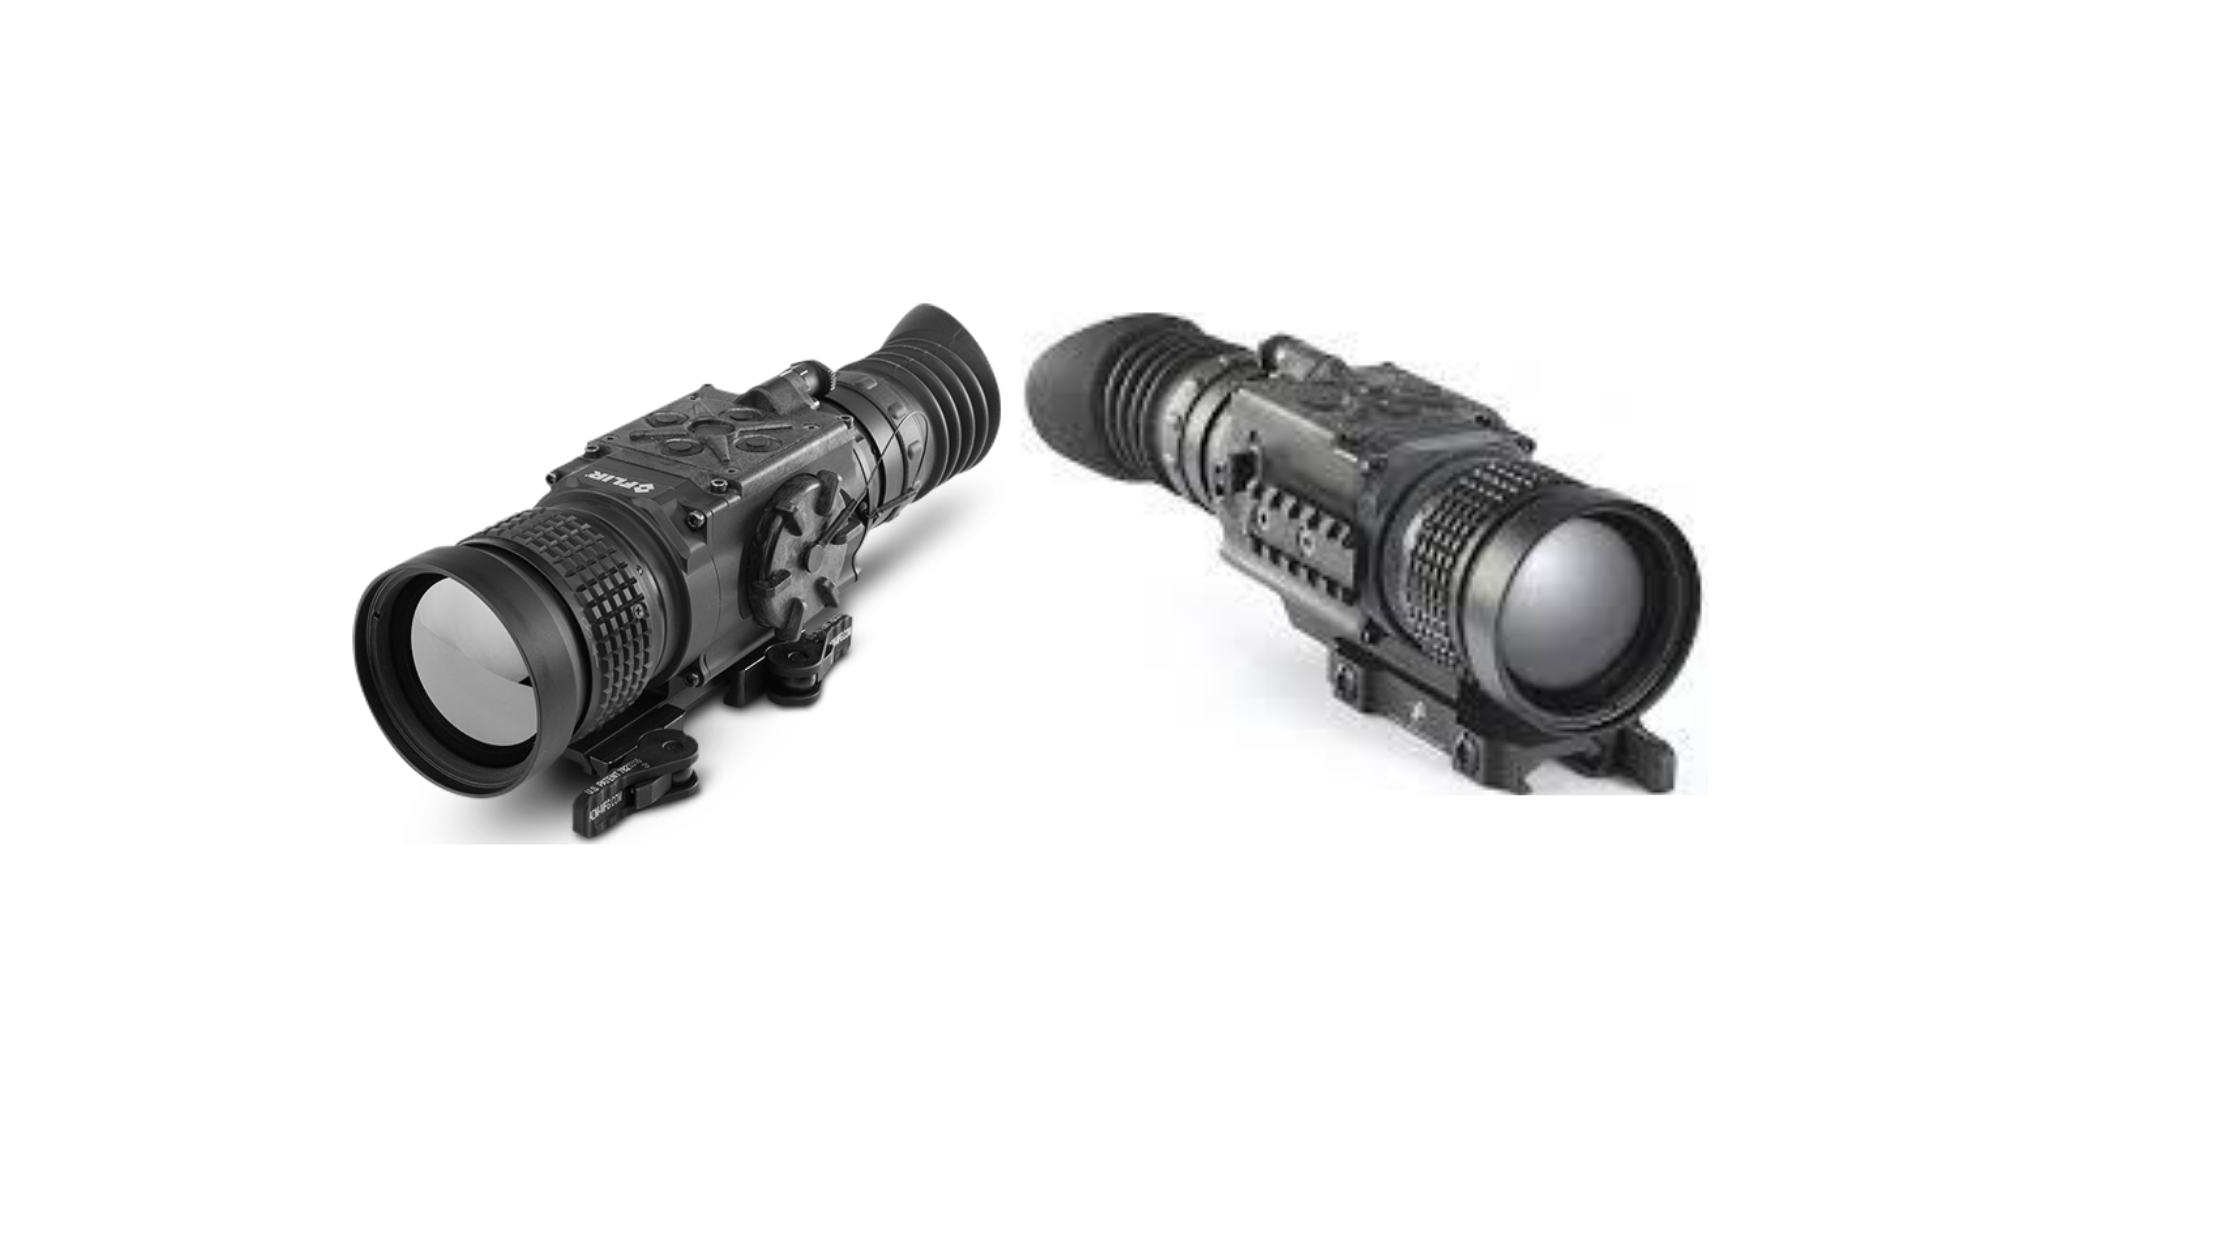 A pair of 2 black FLIR ThermoSight Pro PTS 536 thermal scopes for coyote hunting